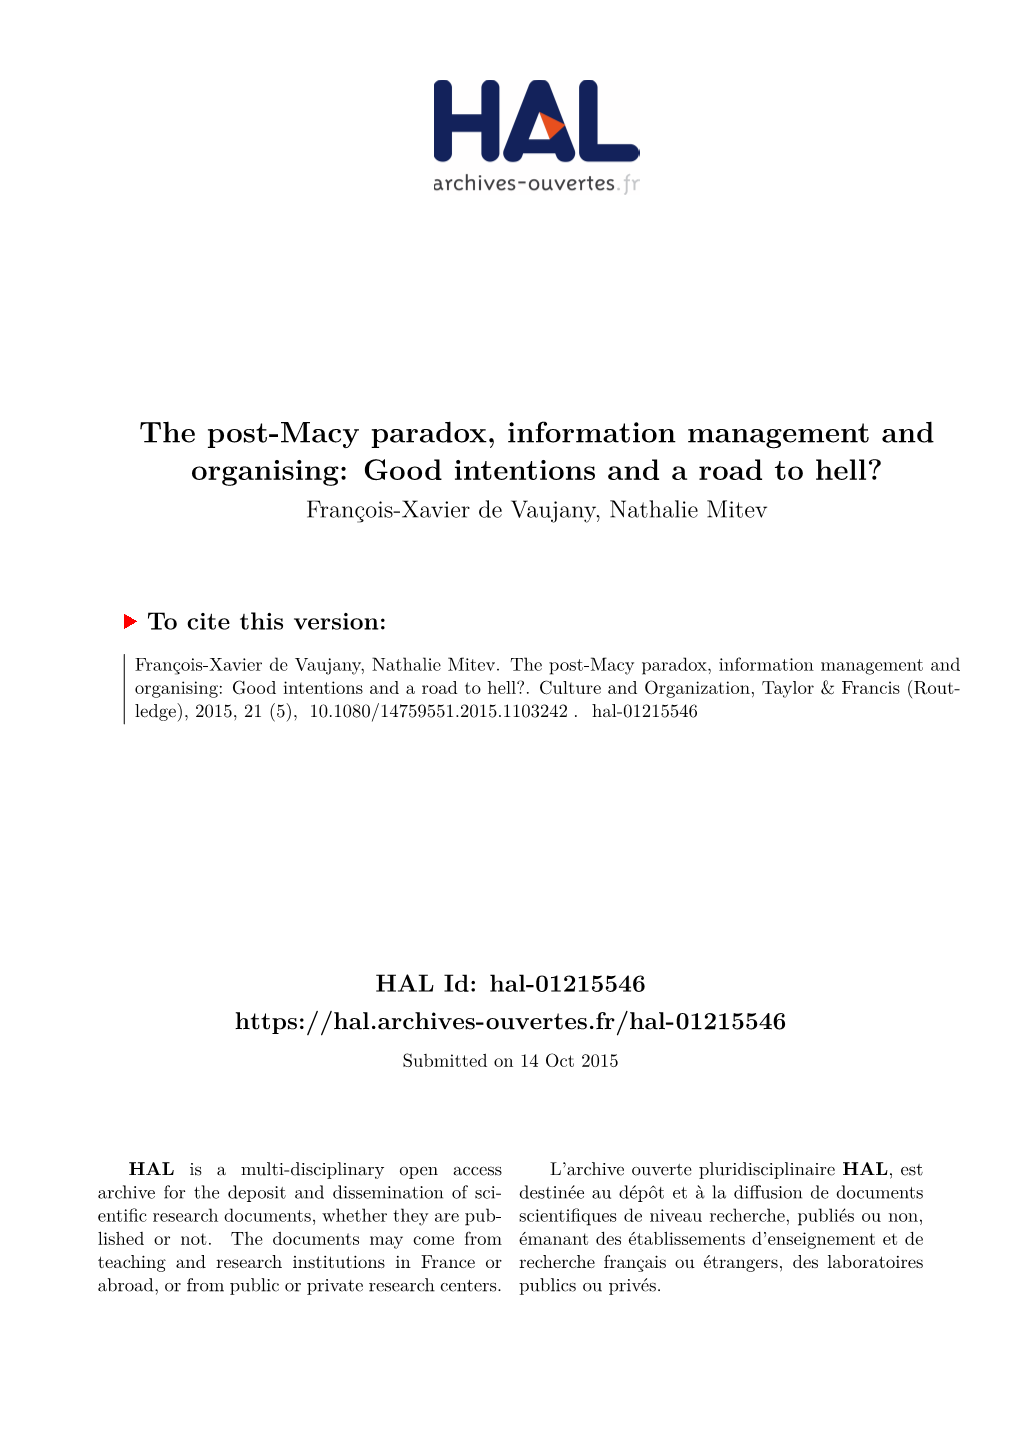 The Post-Macy Paradox, Information Management and Organising: Good Intentions and a Road to Hell? François-Xavier De Vaujany, Nathalie Mitev